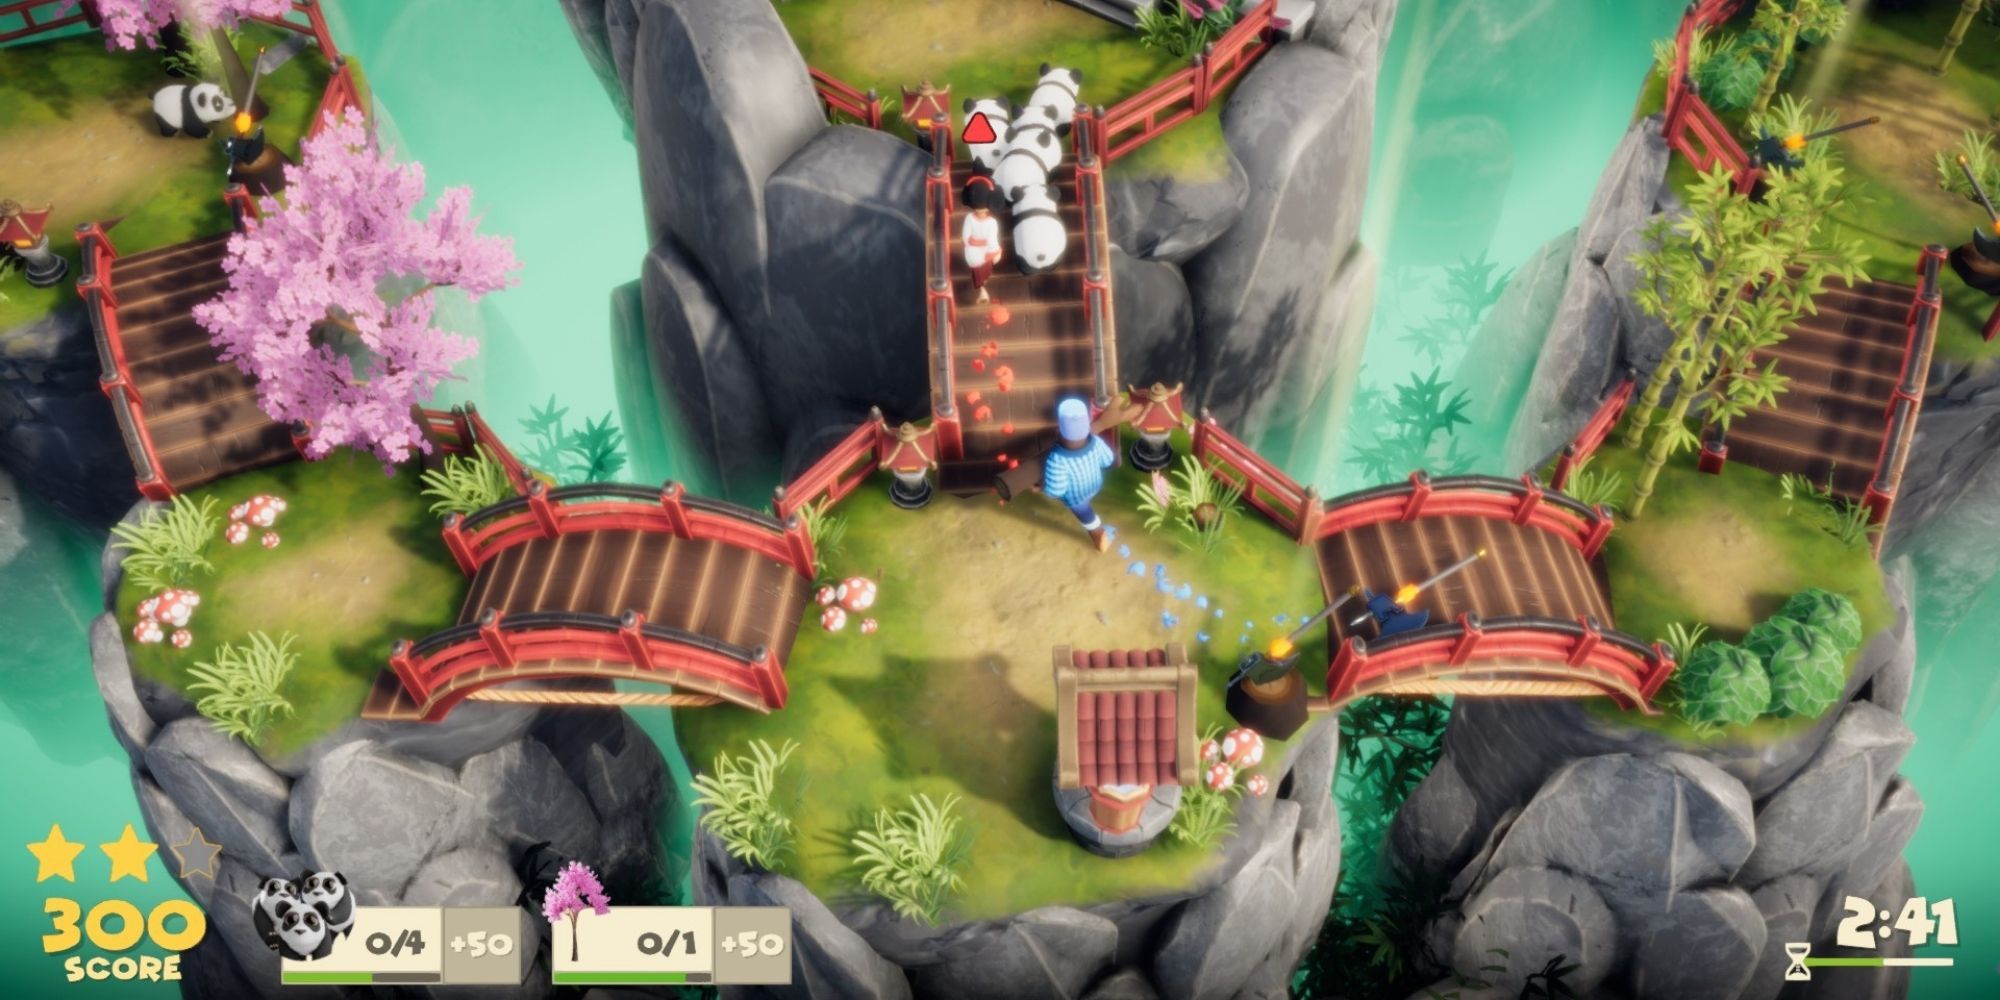 Topdown view of a Lumberhill level with 2 players